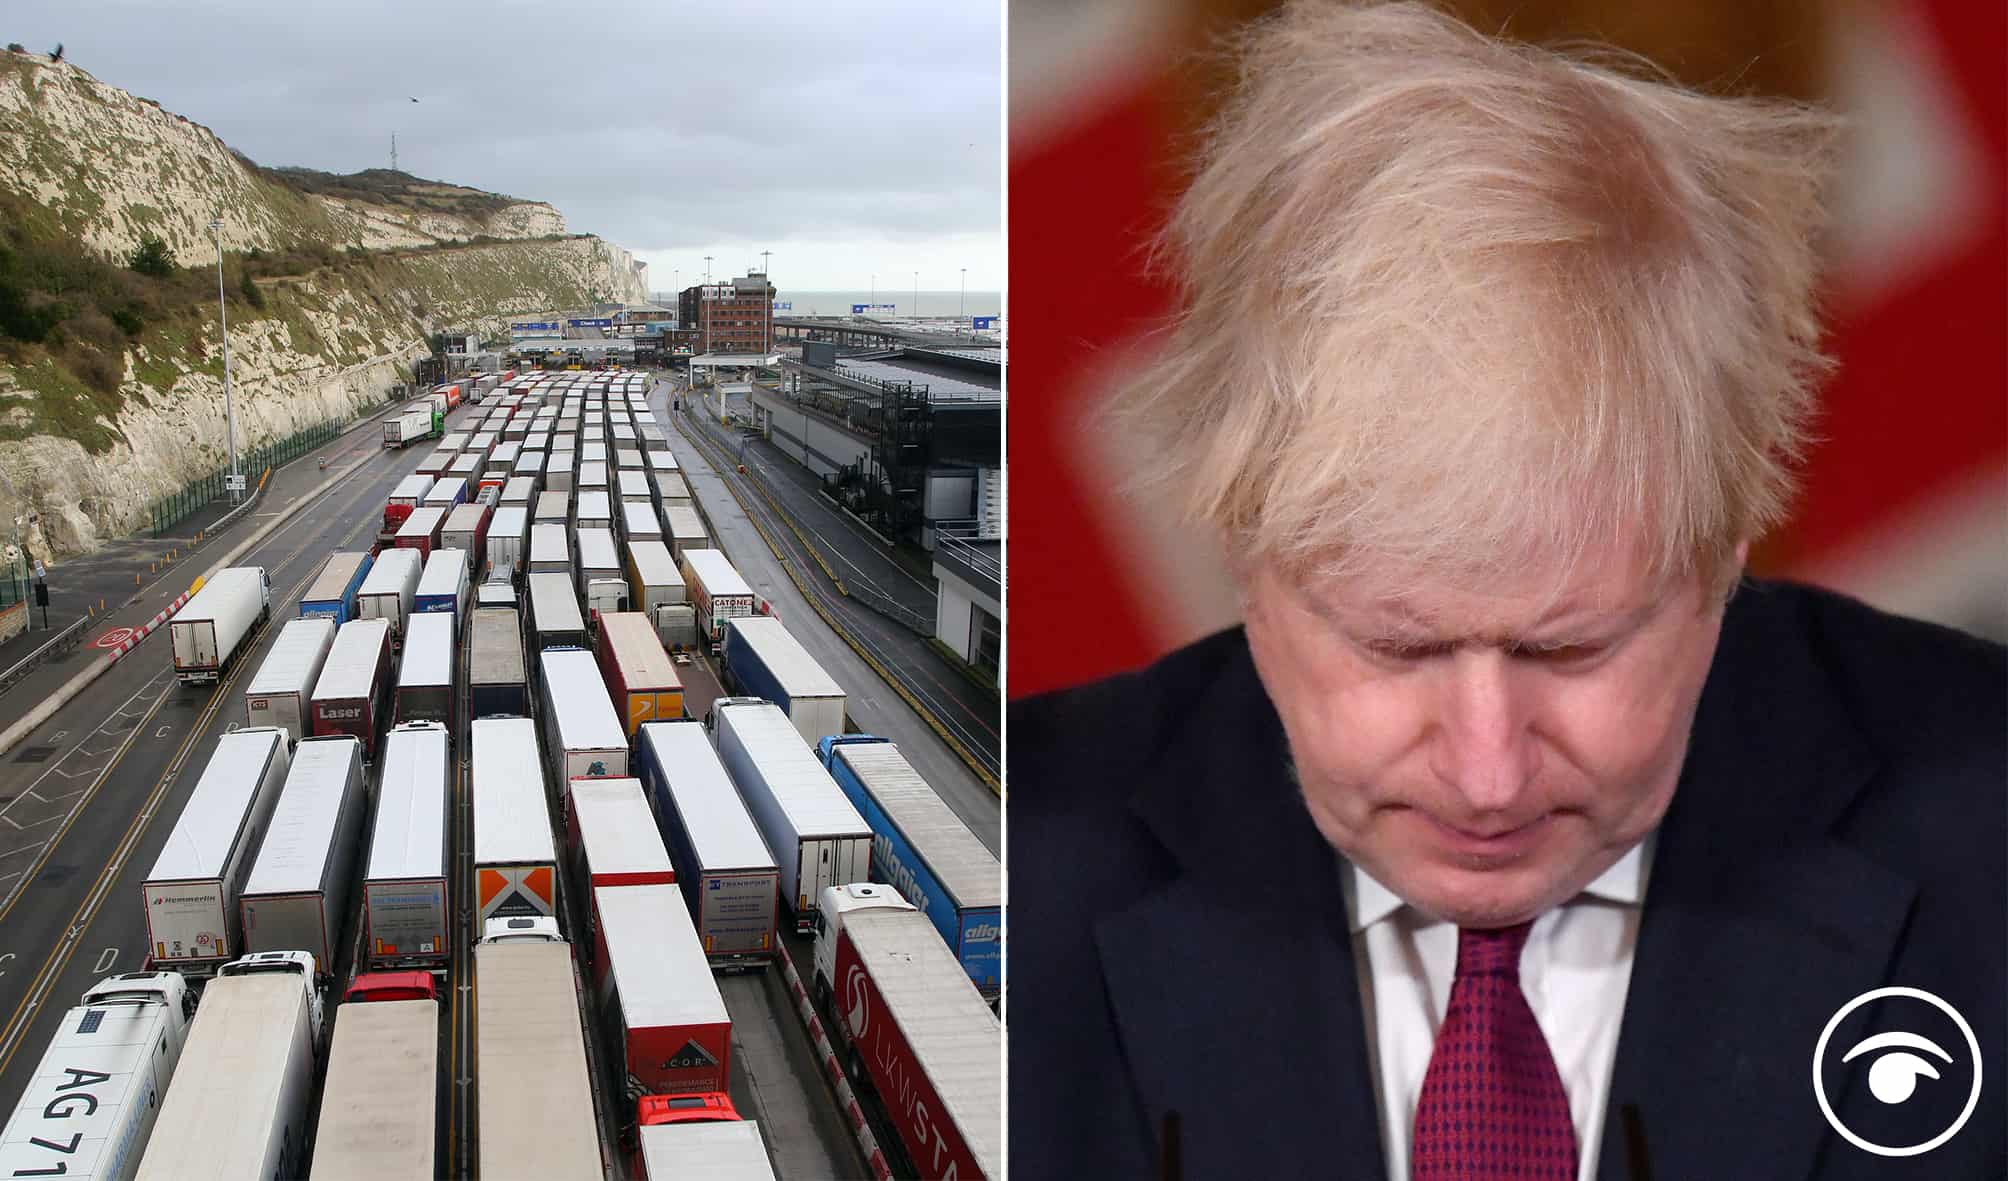 This thread from a business owner sets out grim reality of post-Brexit trade problems